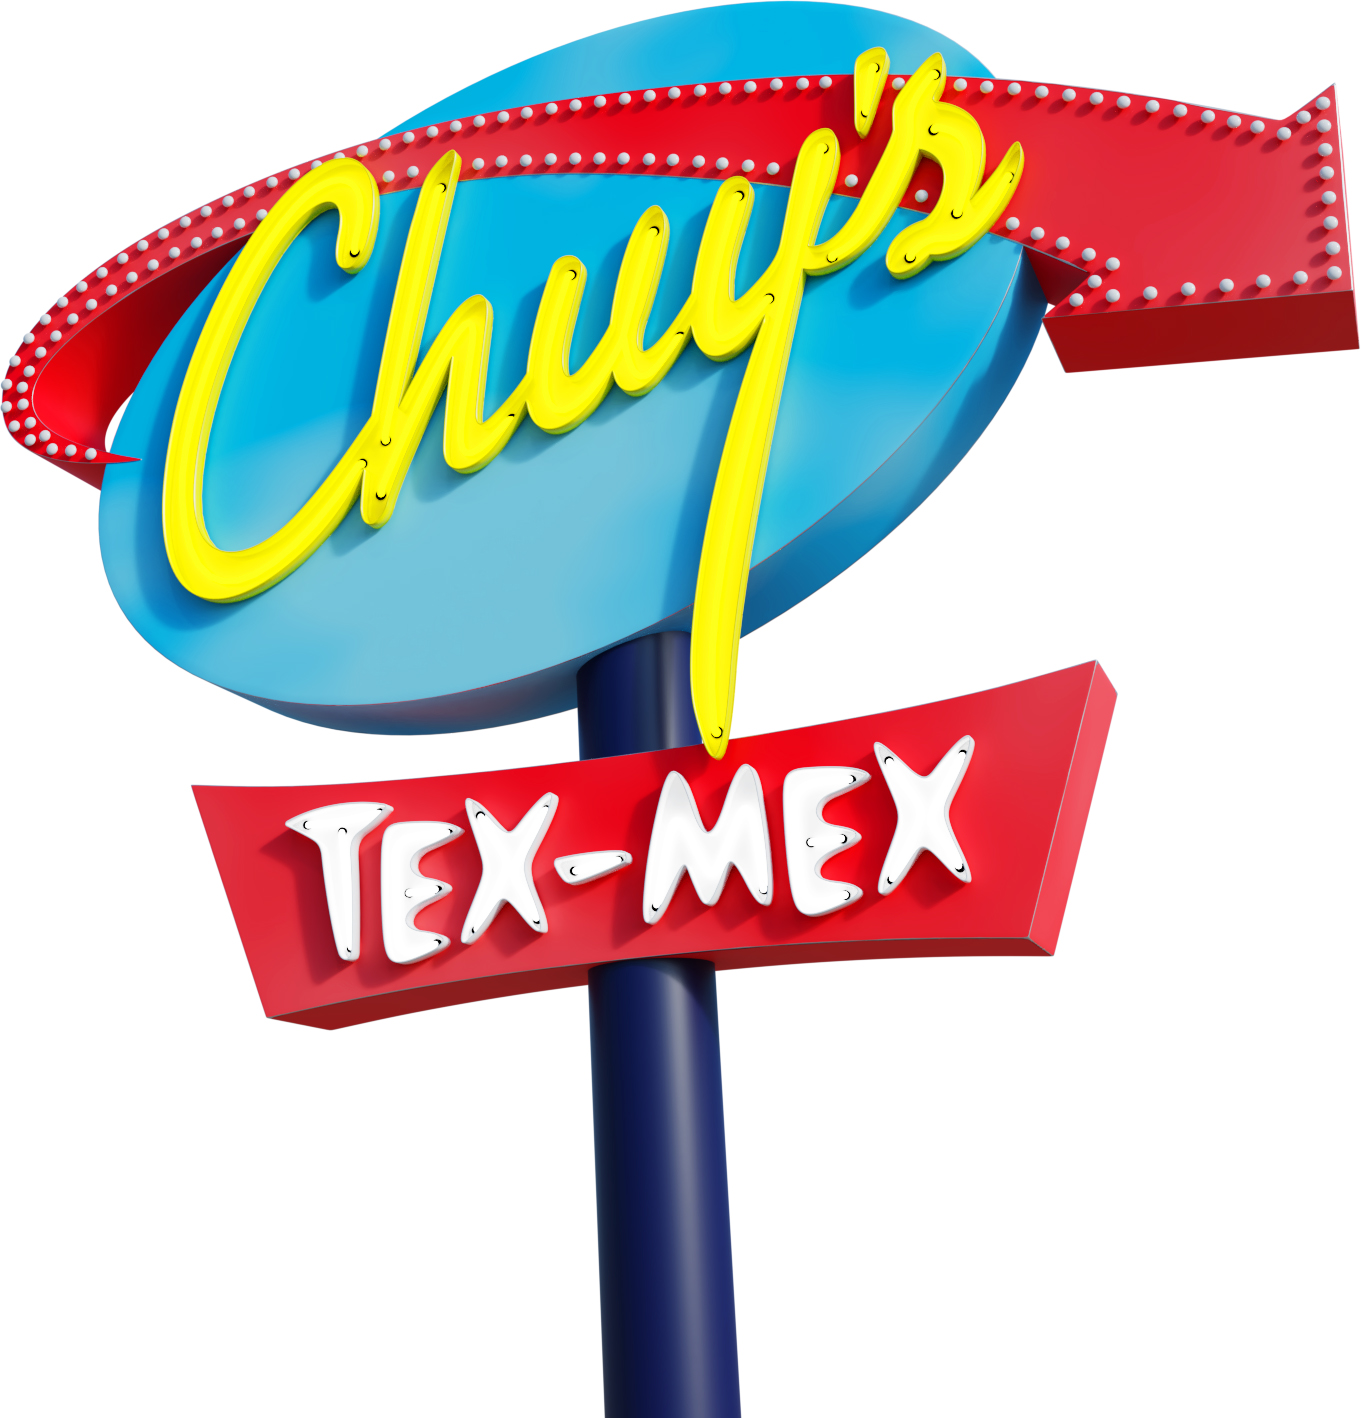 Chuy's Rogers